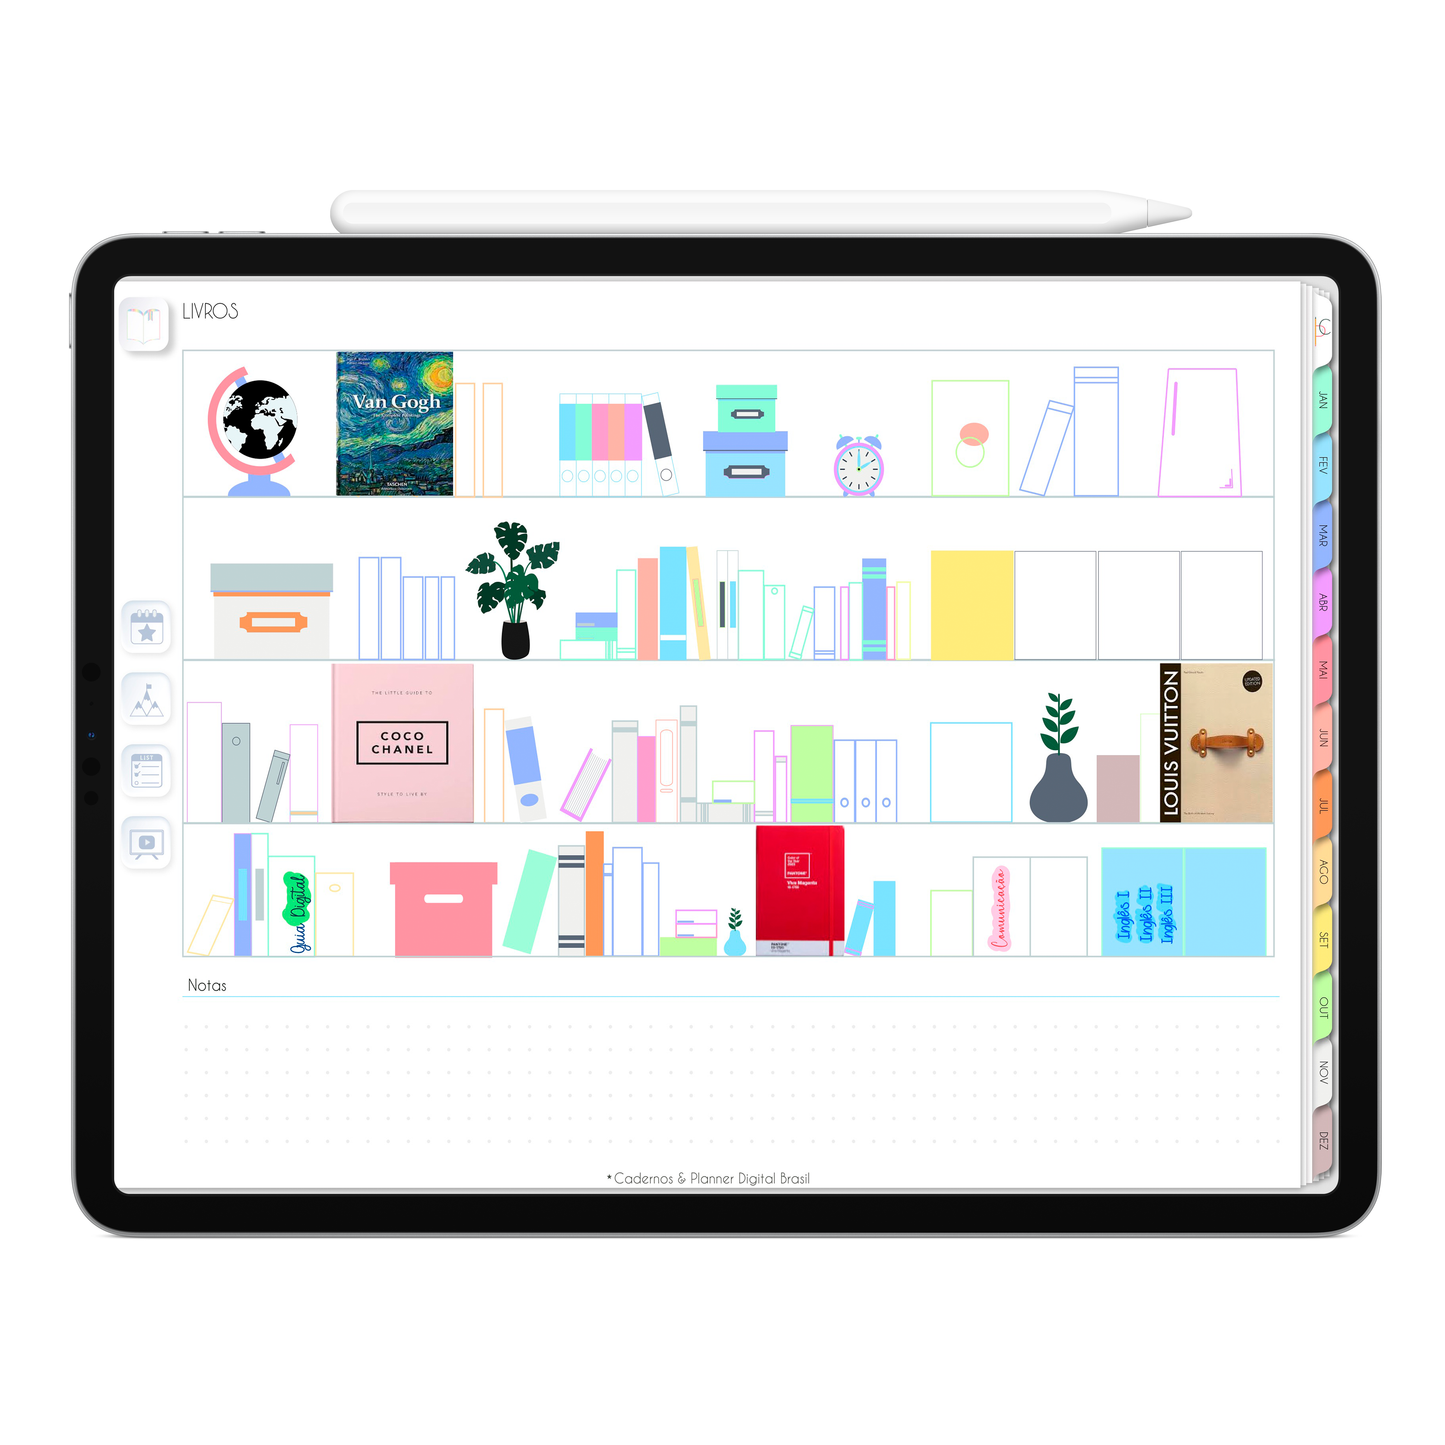 Planner Digital Horizontal Life In Colors 2024 Gold Flowers • Para iPad e Tablet Android • Download Instantâneo • Sustentável